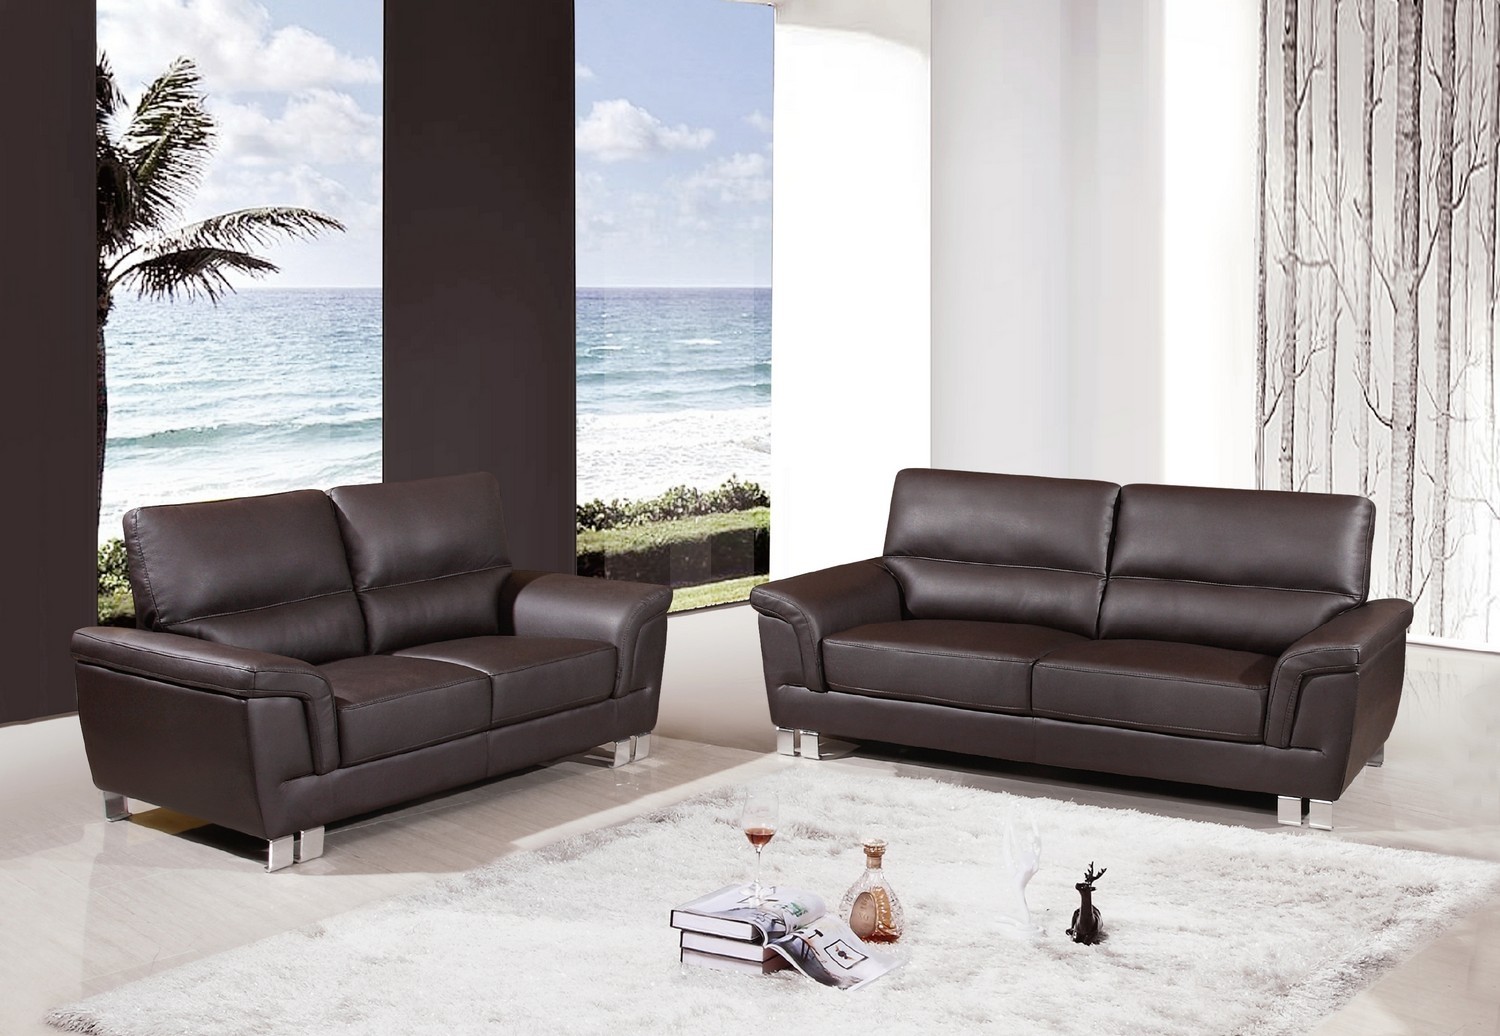 64'' X 36'' X 37'' Modern Brown Leather Sofa And Loveseat